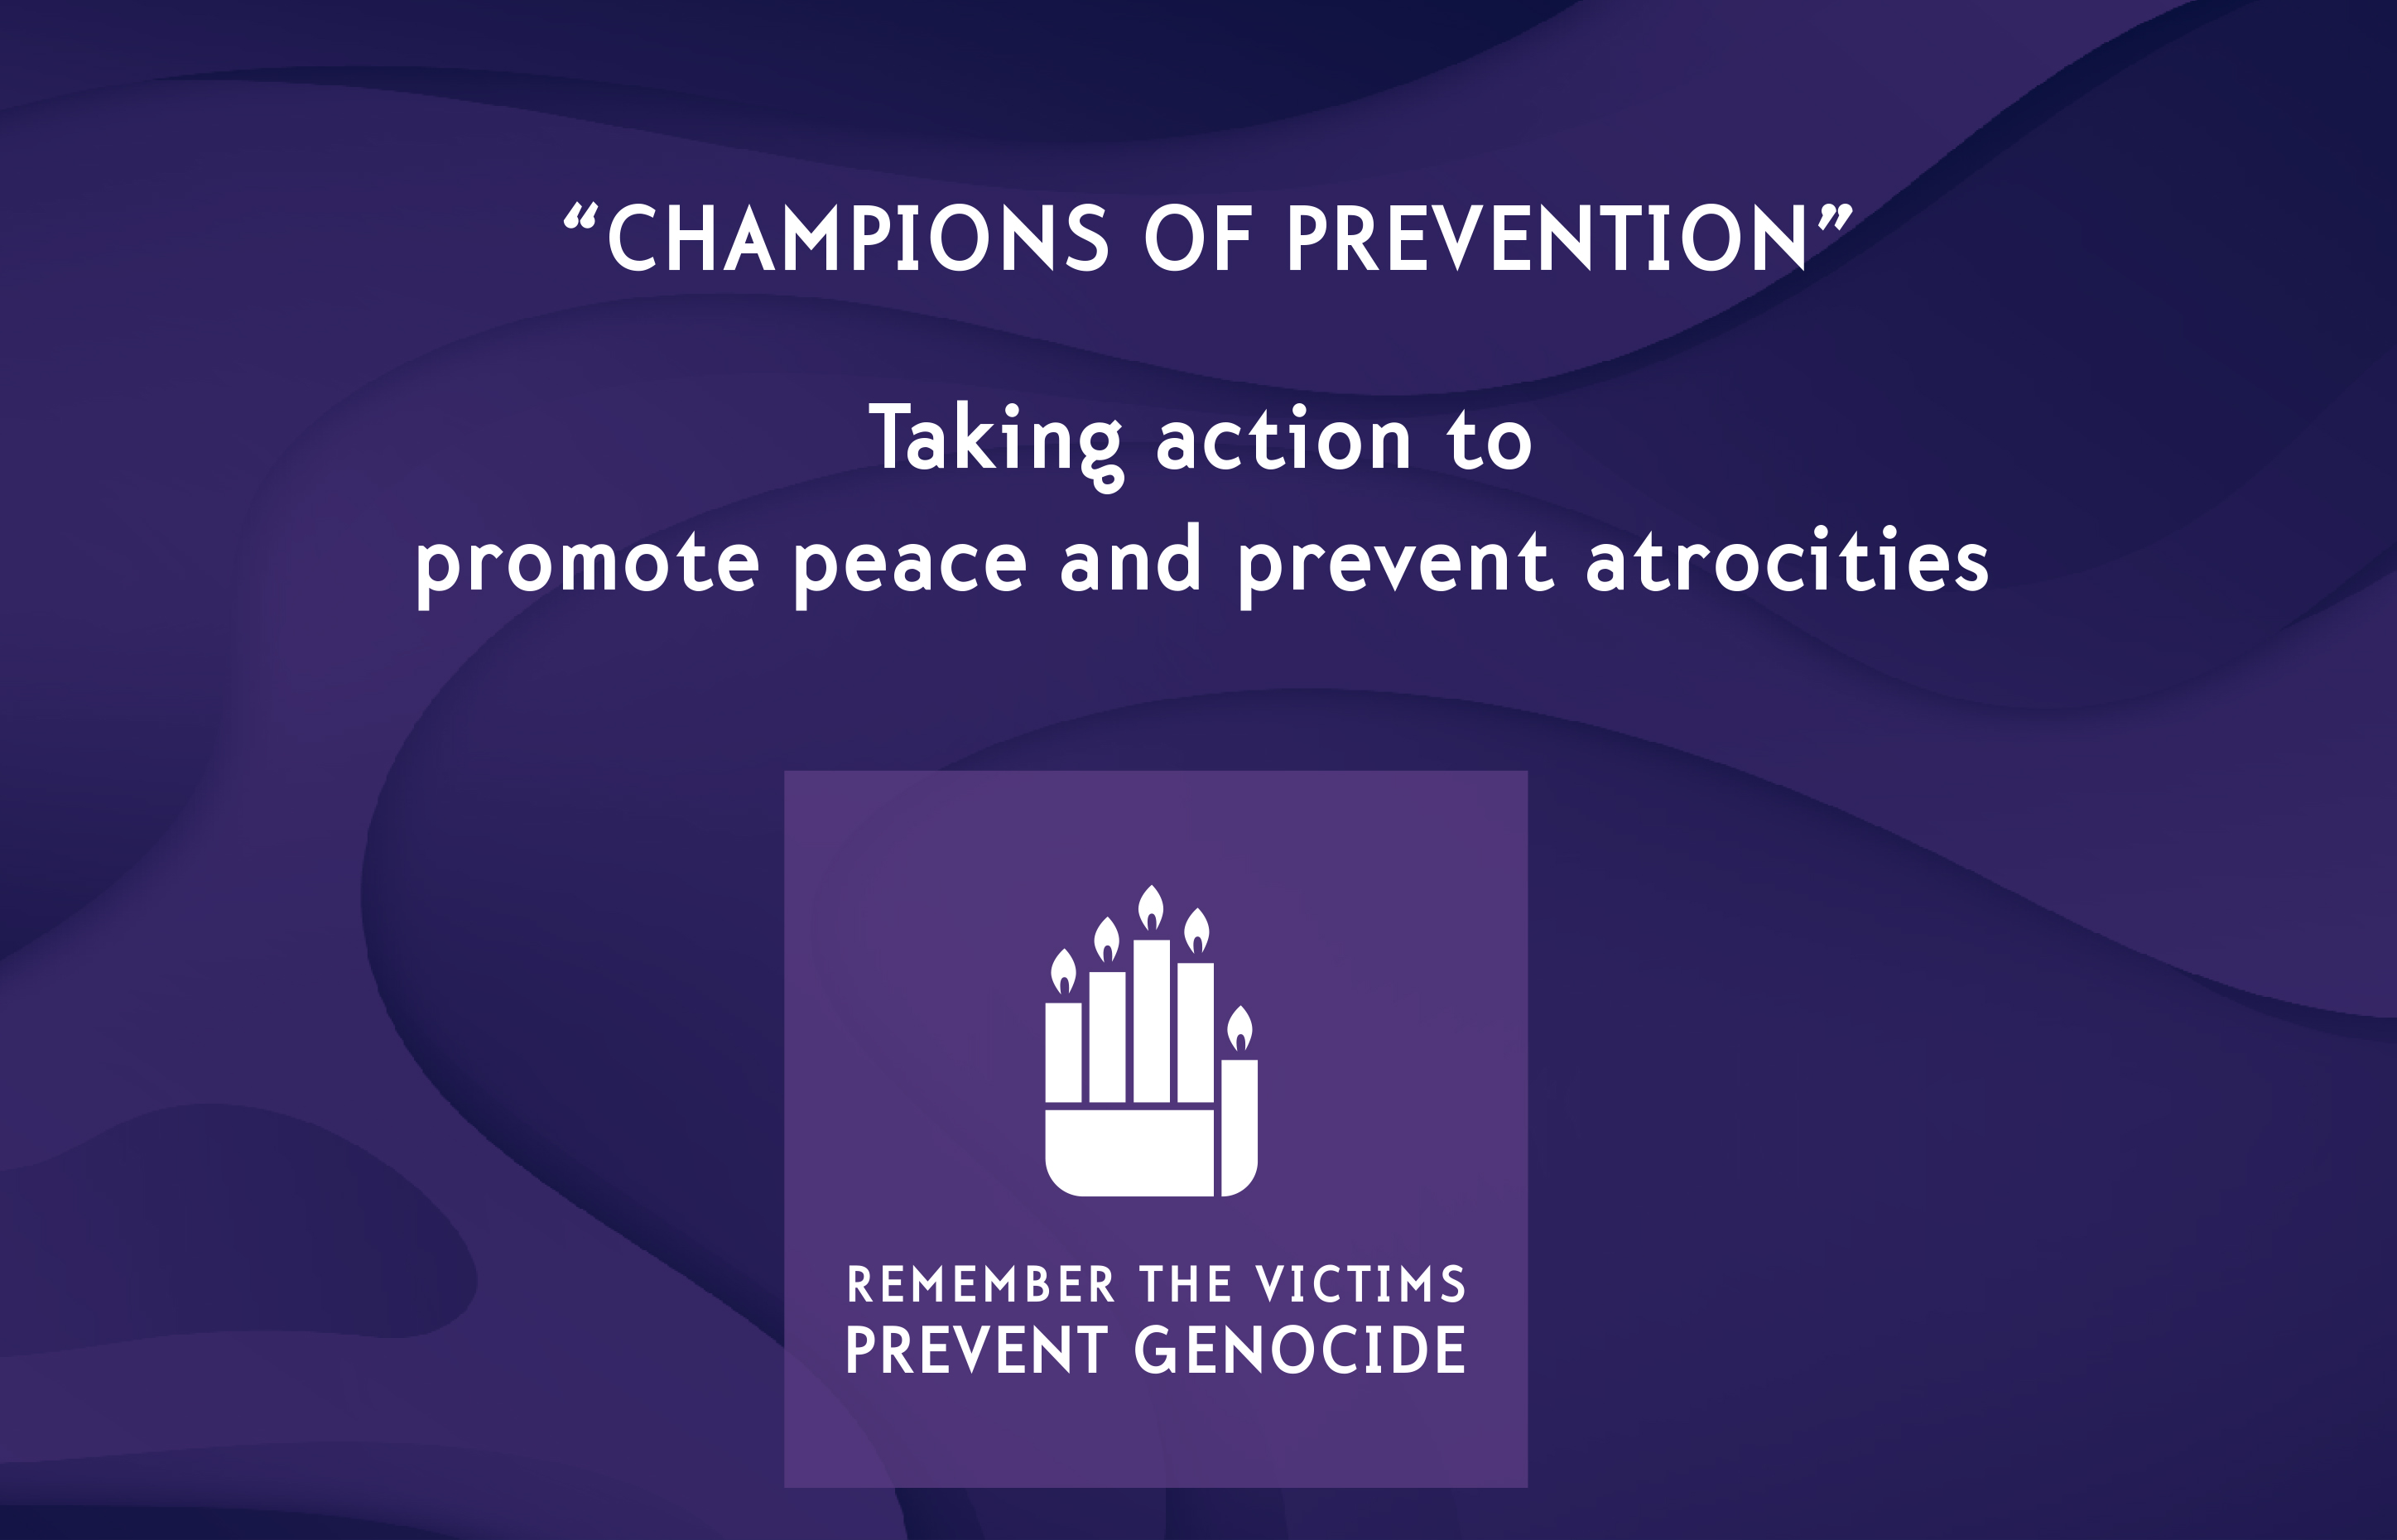 Exhibition: Champions of Prevention